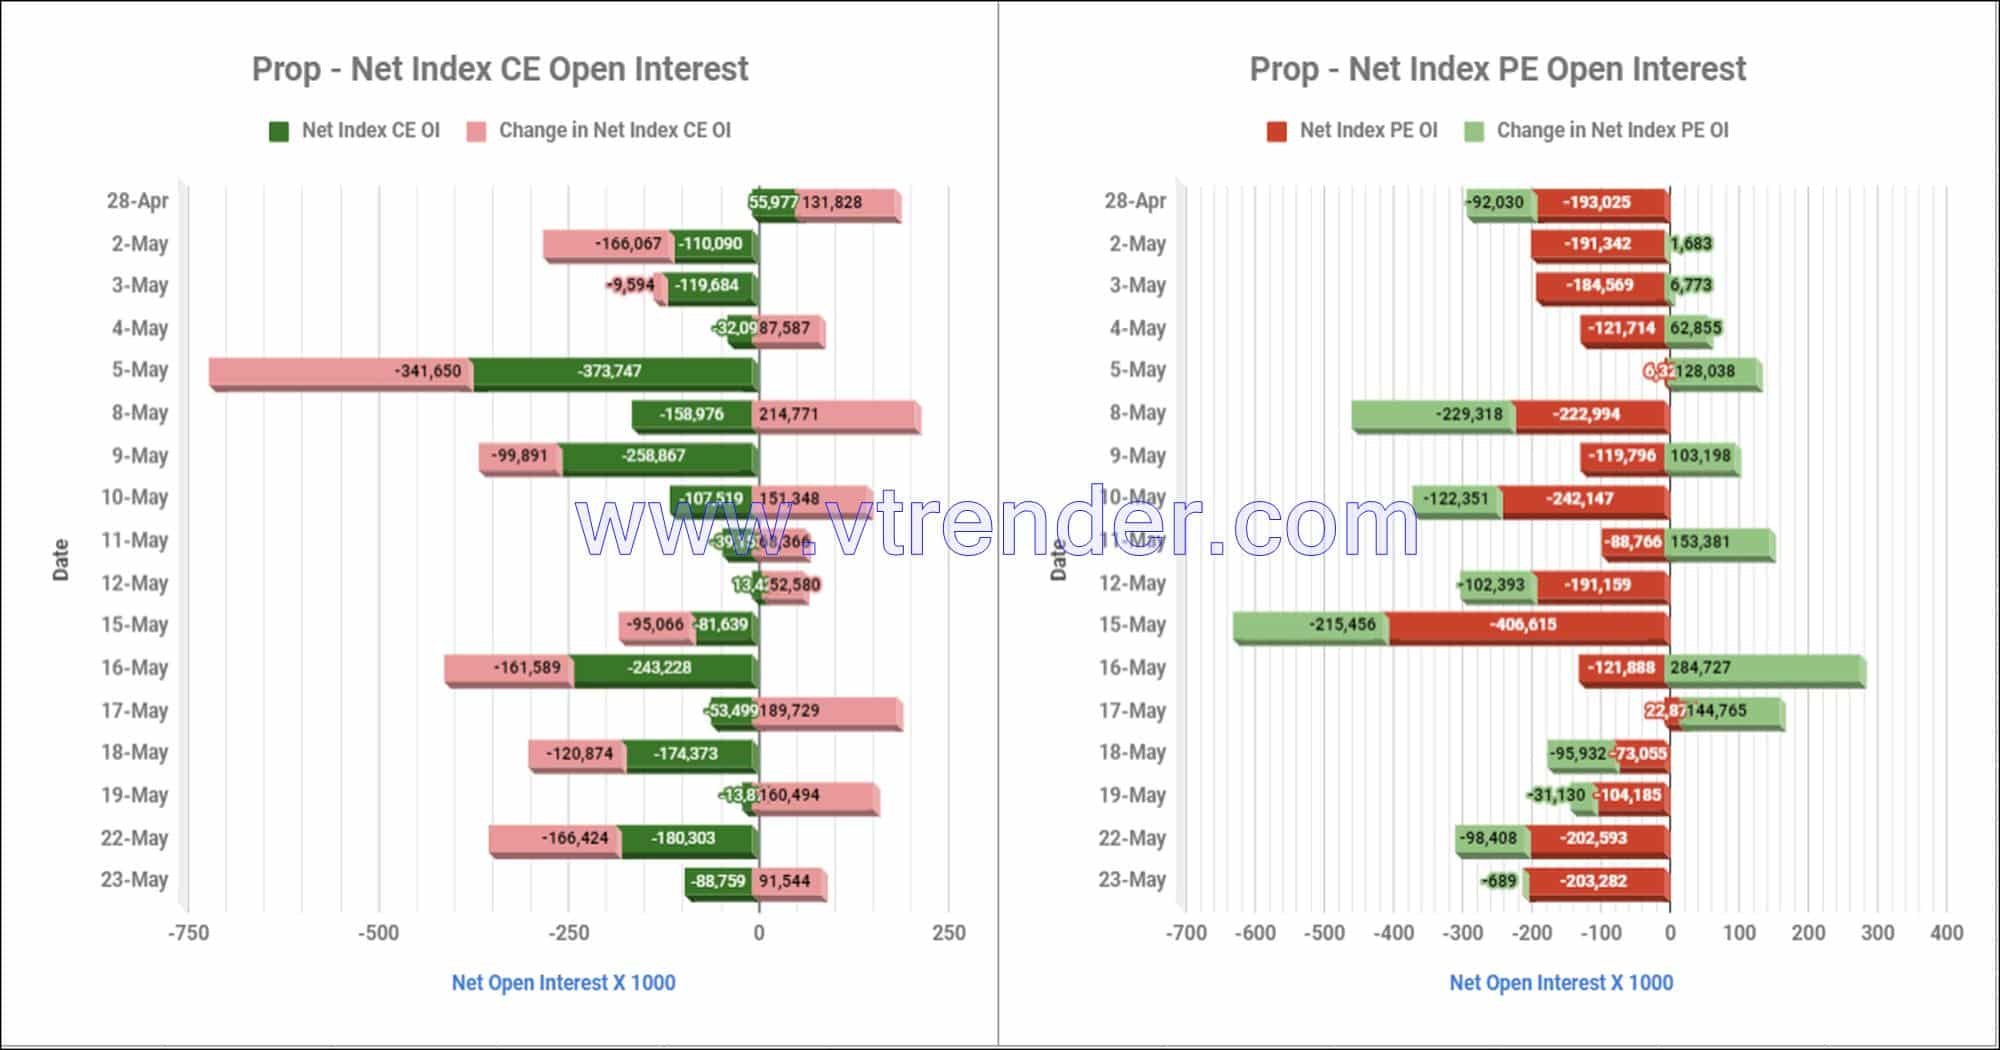 Proinop23May Participantwise Net Open Interest And Net Equity Investments – 23Rd May 2023 Client, Equity, Fii, Index Futures, Index Options, Open Interest, Prop